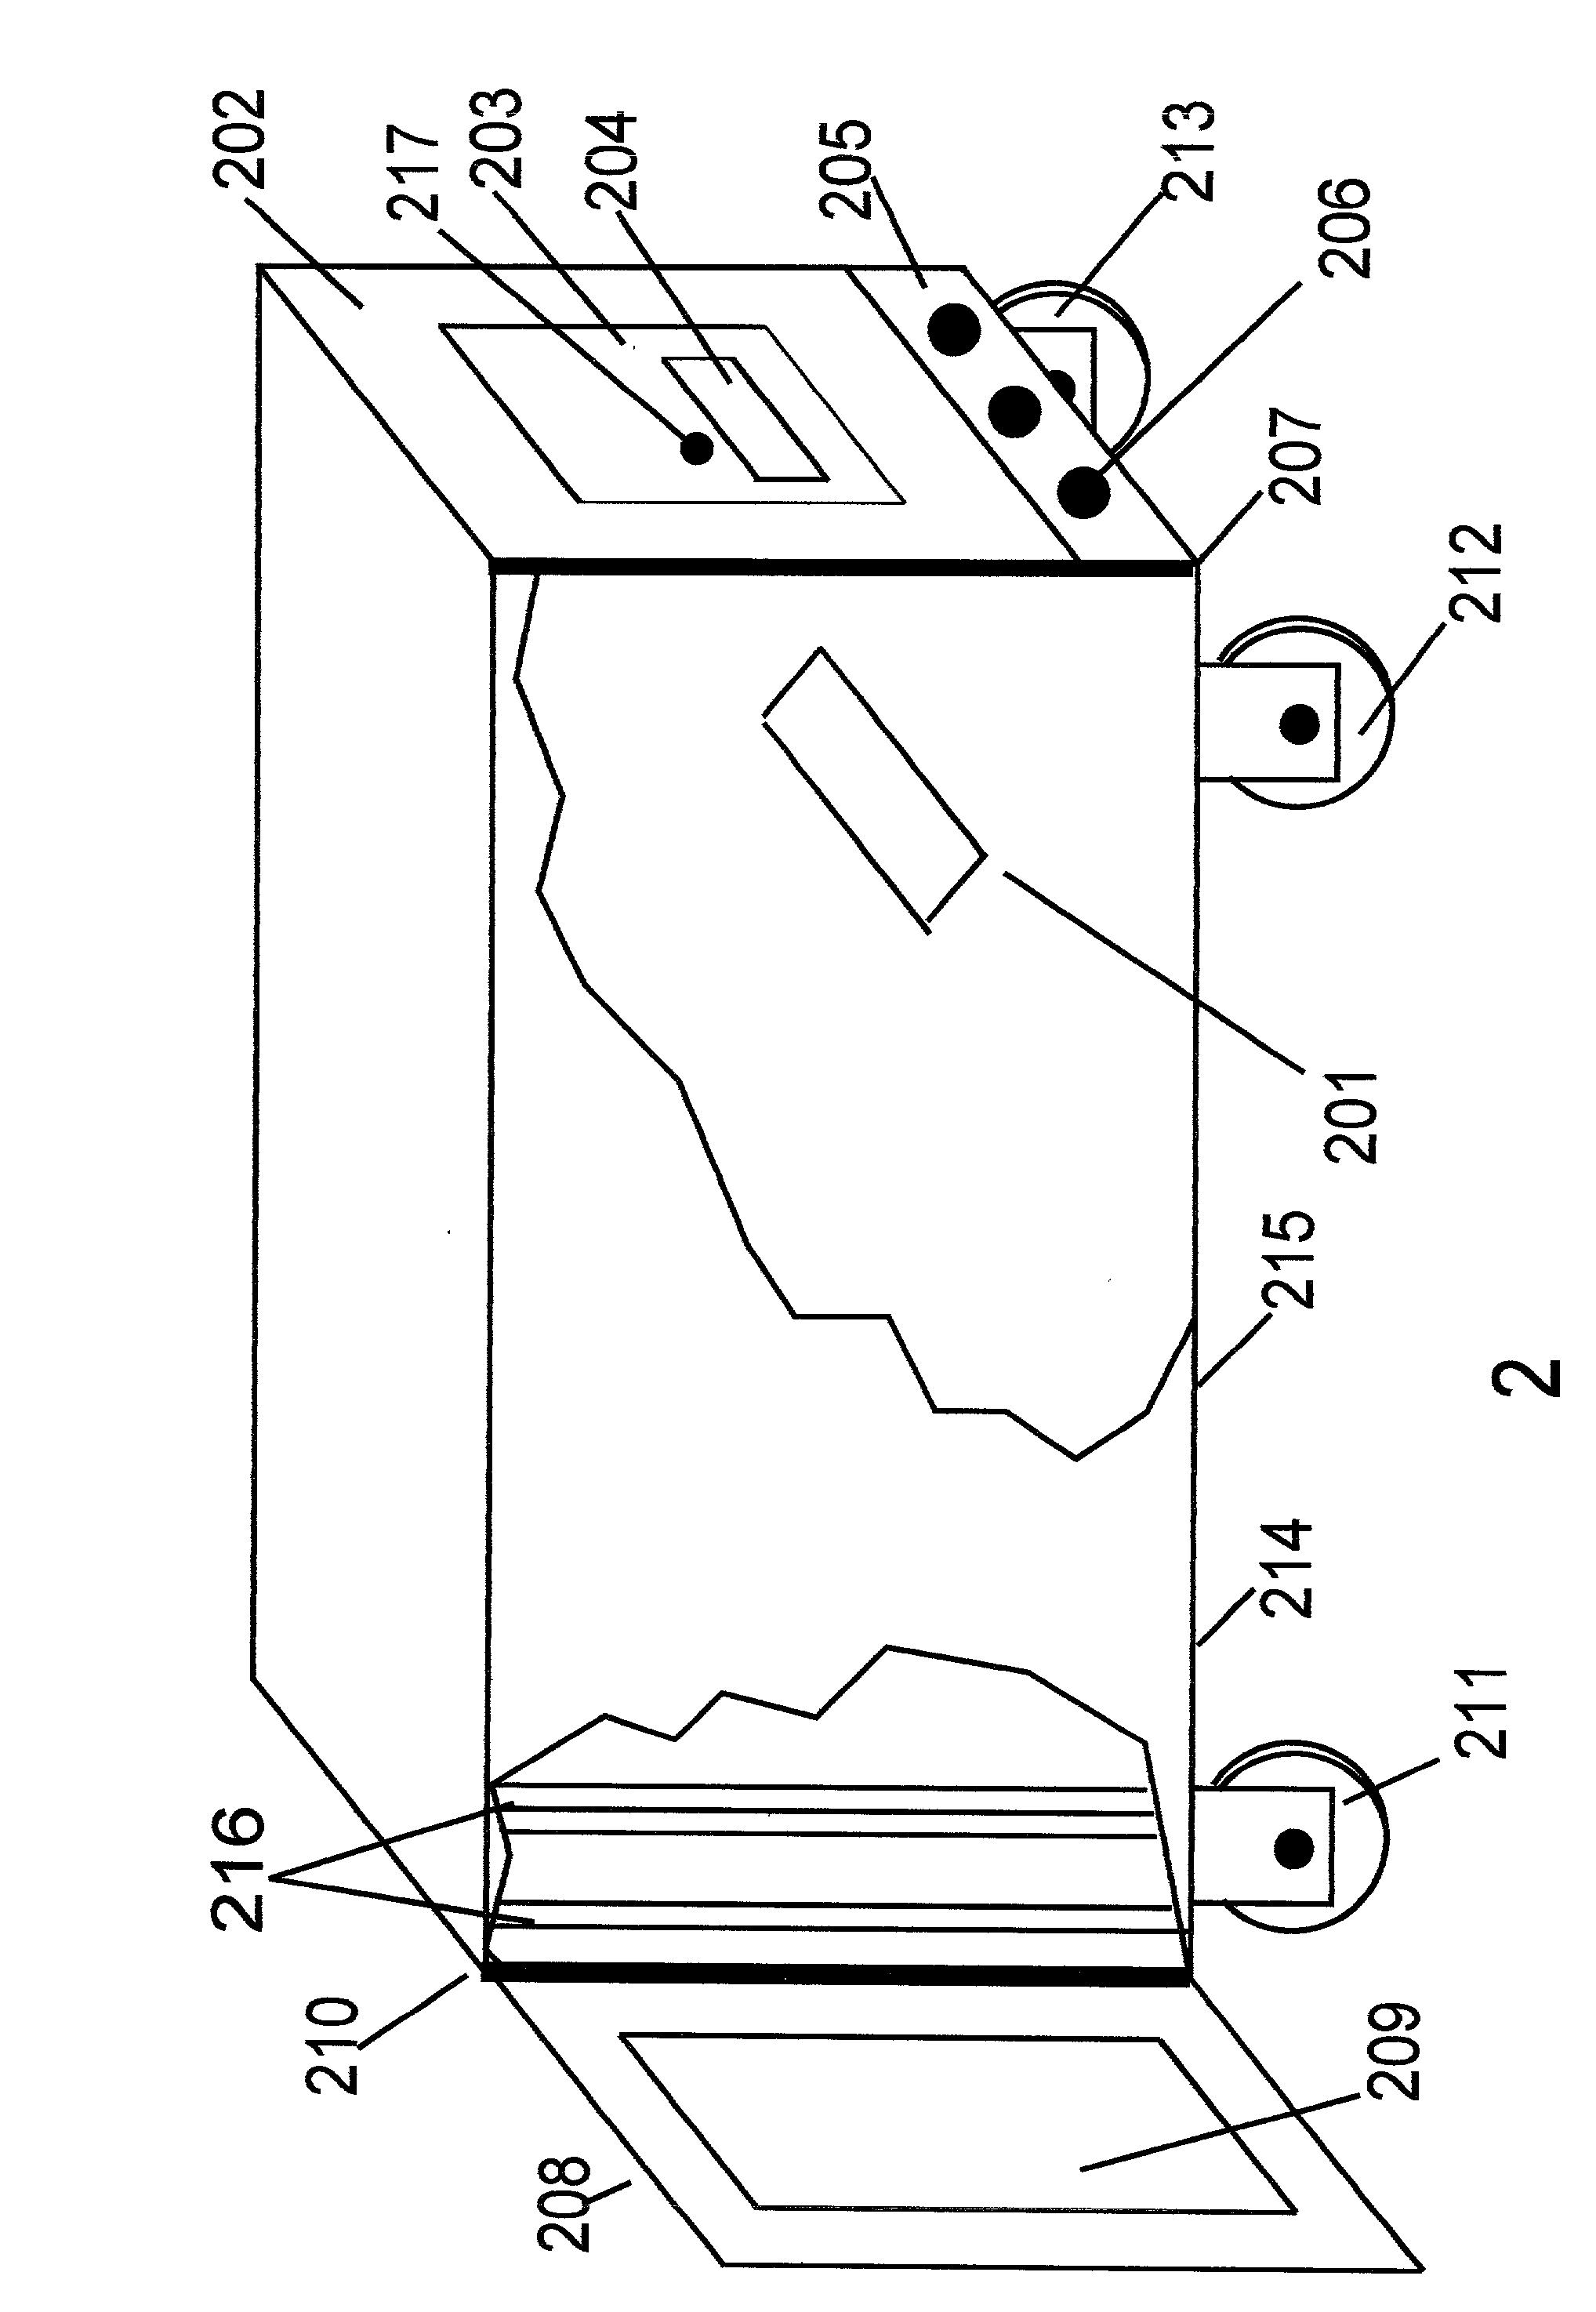 Acoustical noise reducing enclosure for electrical and electronic devices